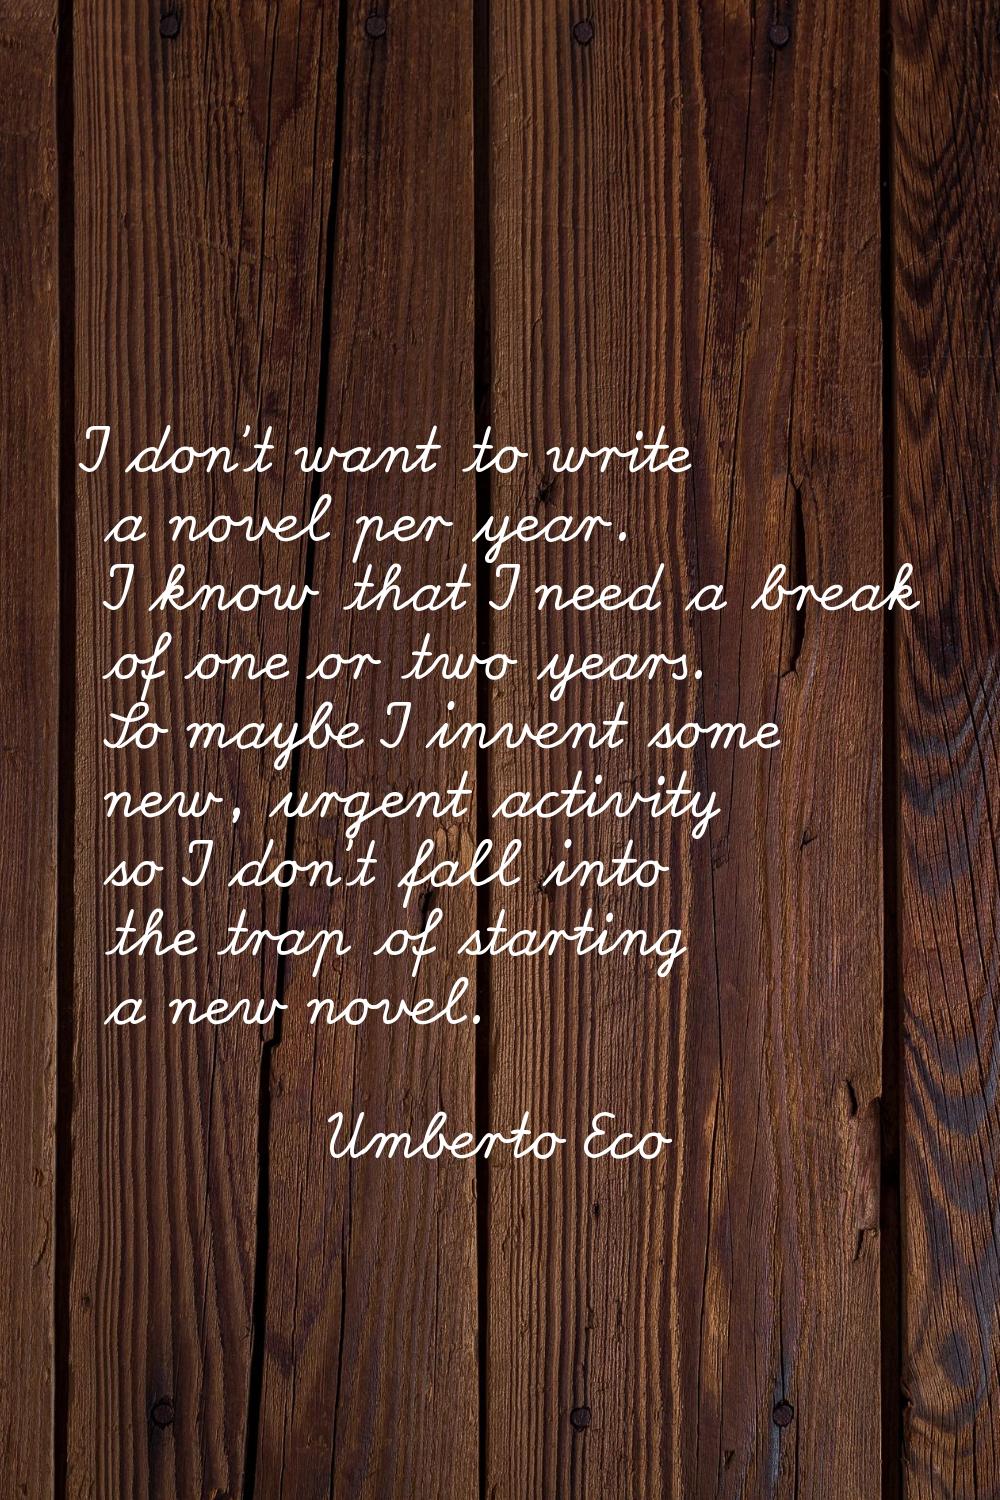 I don't want to write a novel per year. I know that I need a break of one or two years. So maybe I 